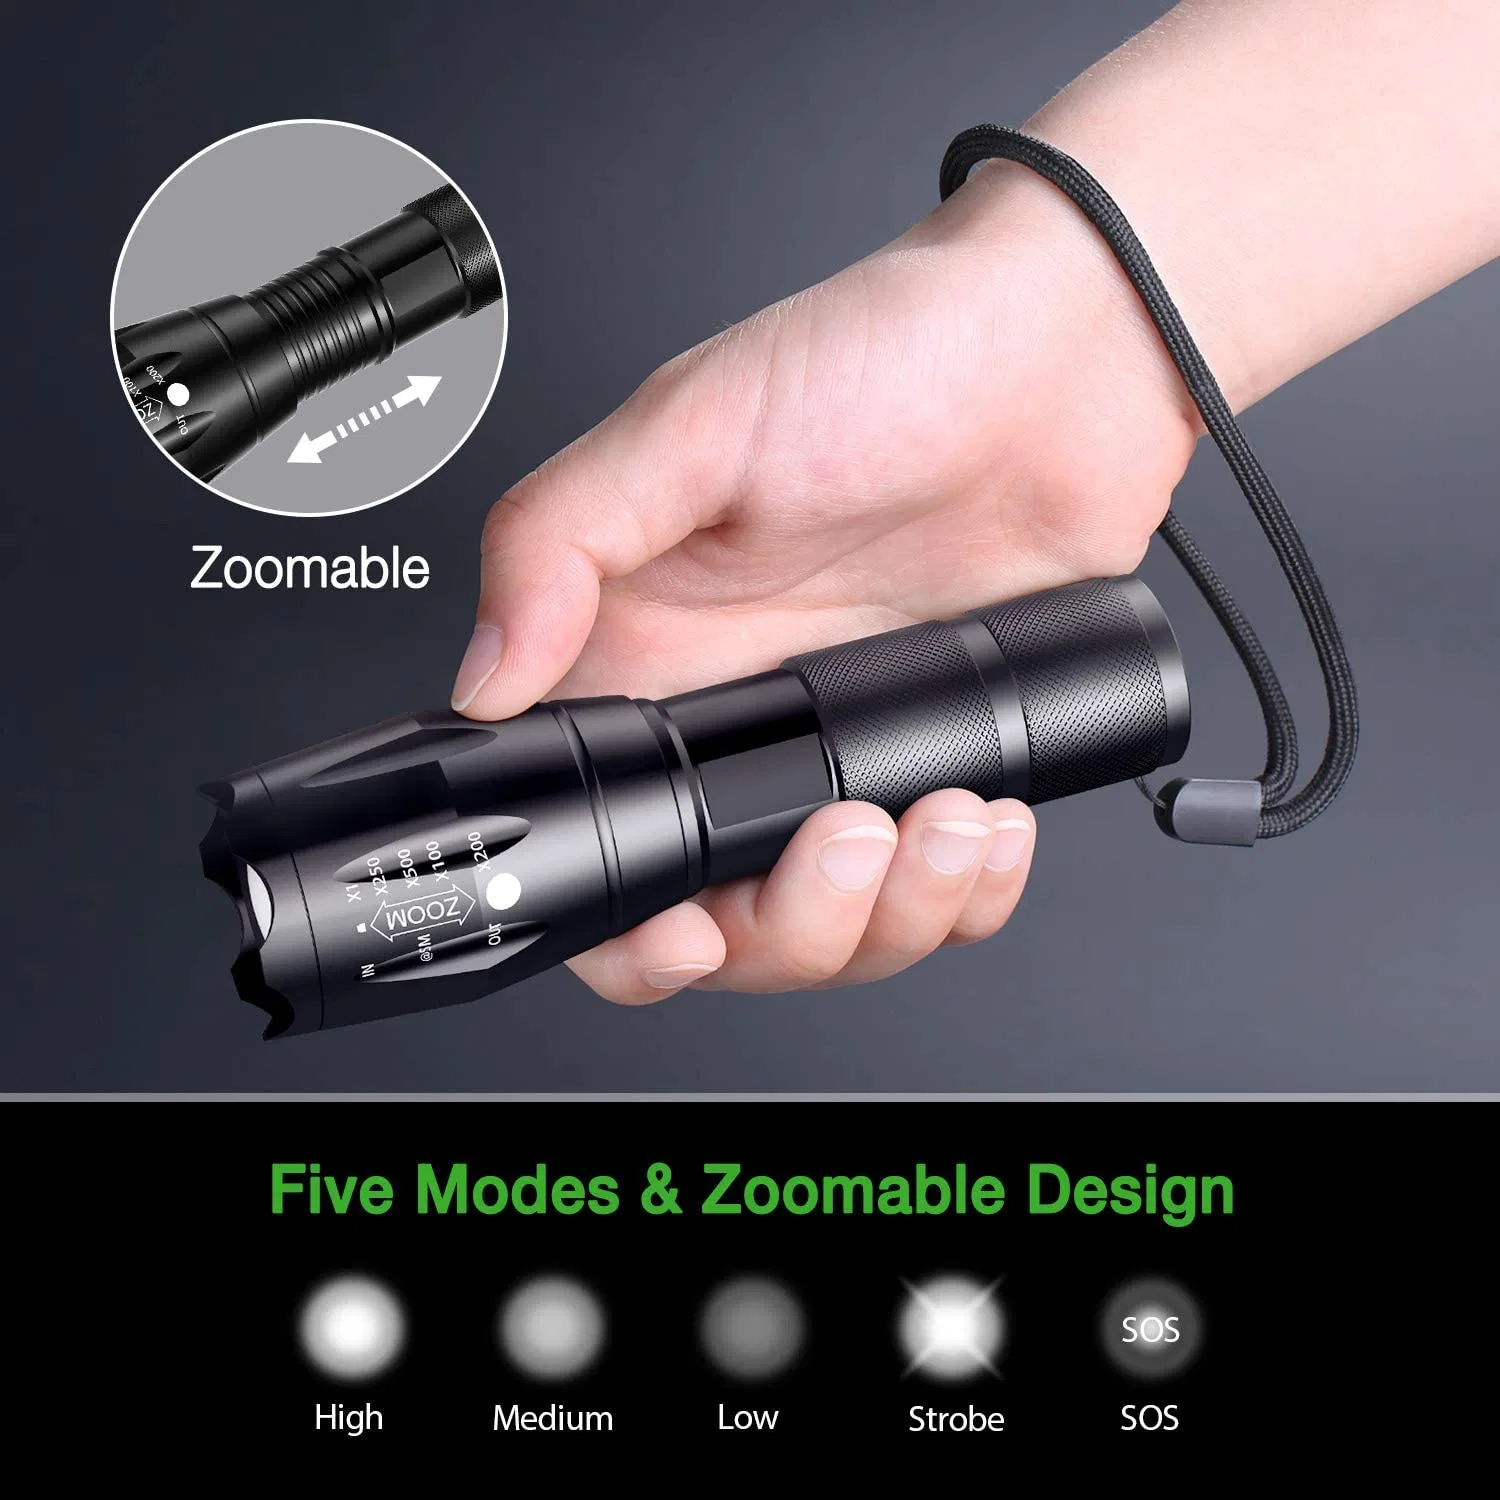 LED Torch Rechargeable Super Bright Torch 18650 Lithium Battery and USB Charger, IP65 Waterproof Zoomable Flashlight for Fishing Camping Emergency